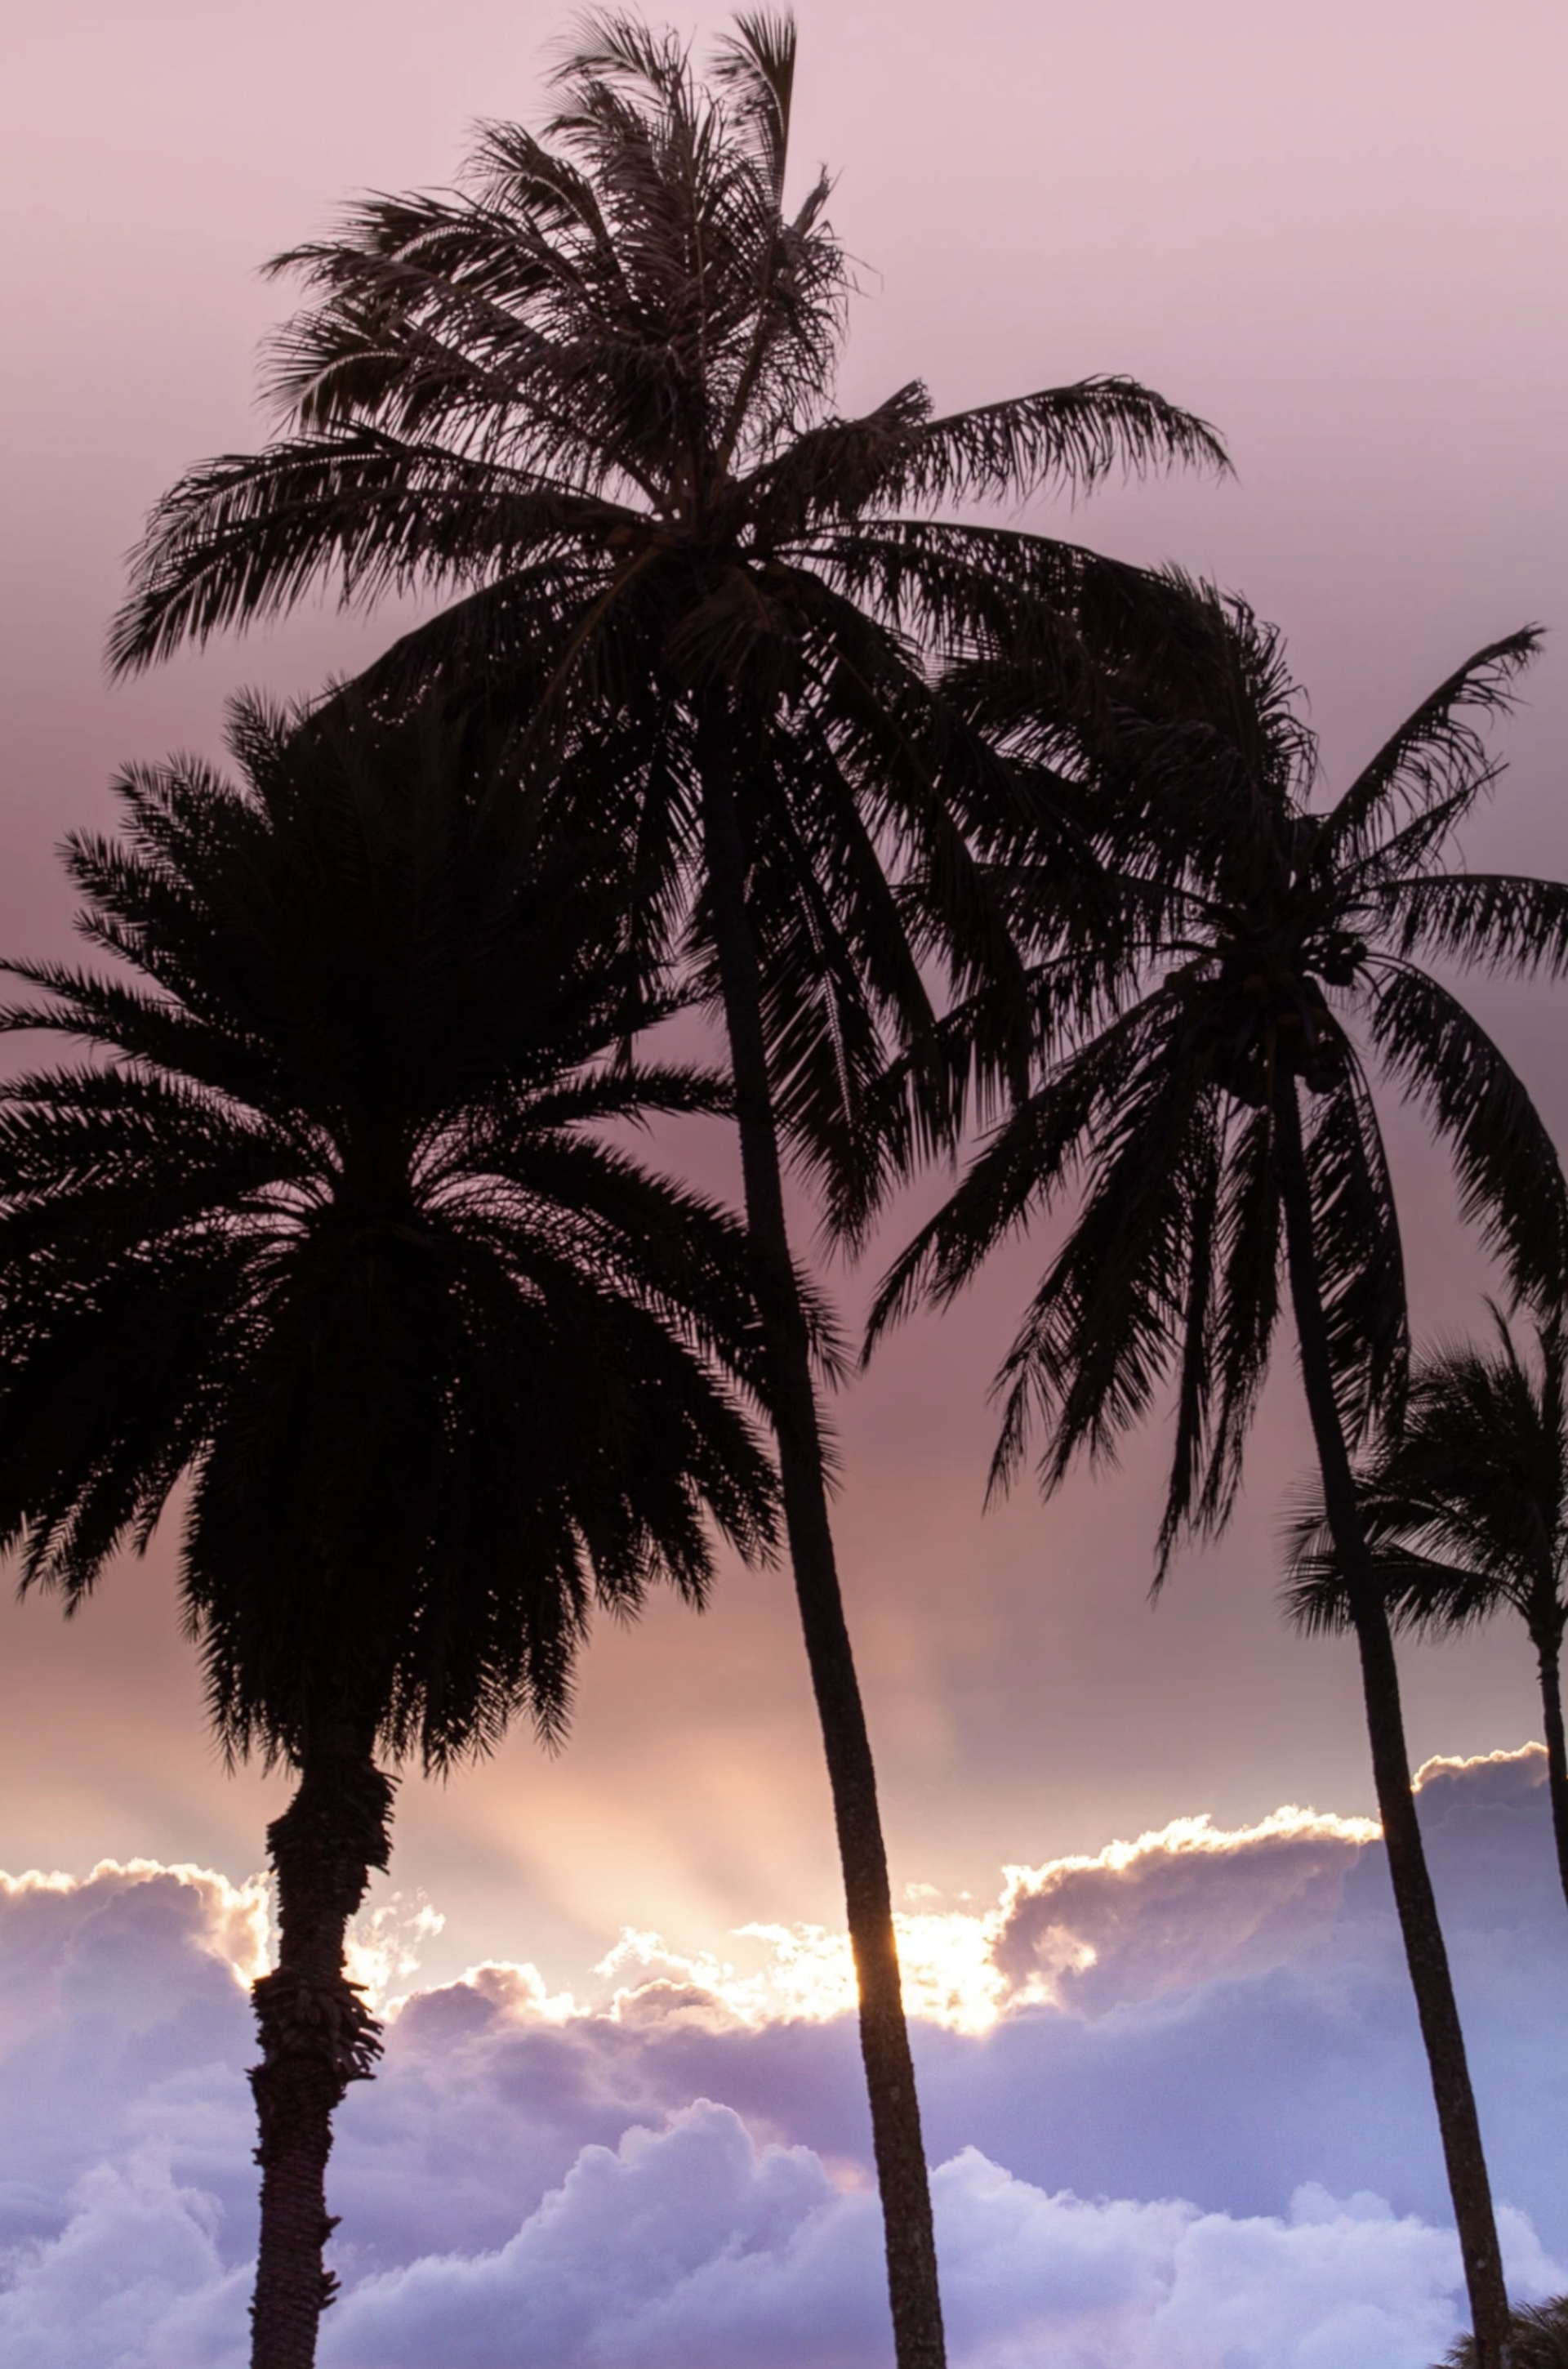 Heavenly Palms by Danny Hale